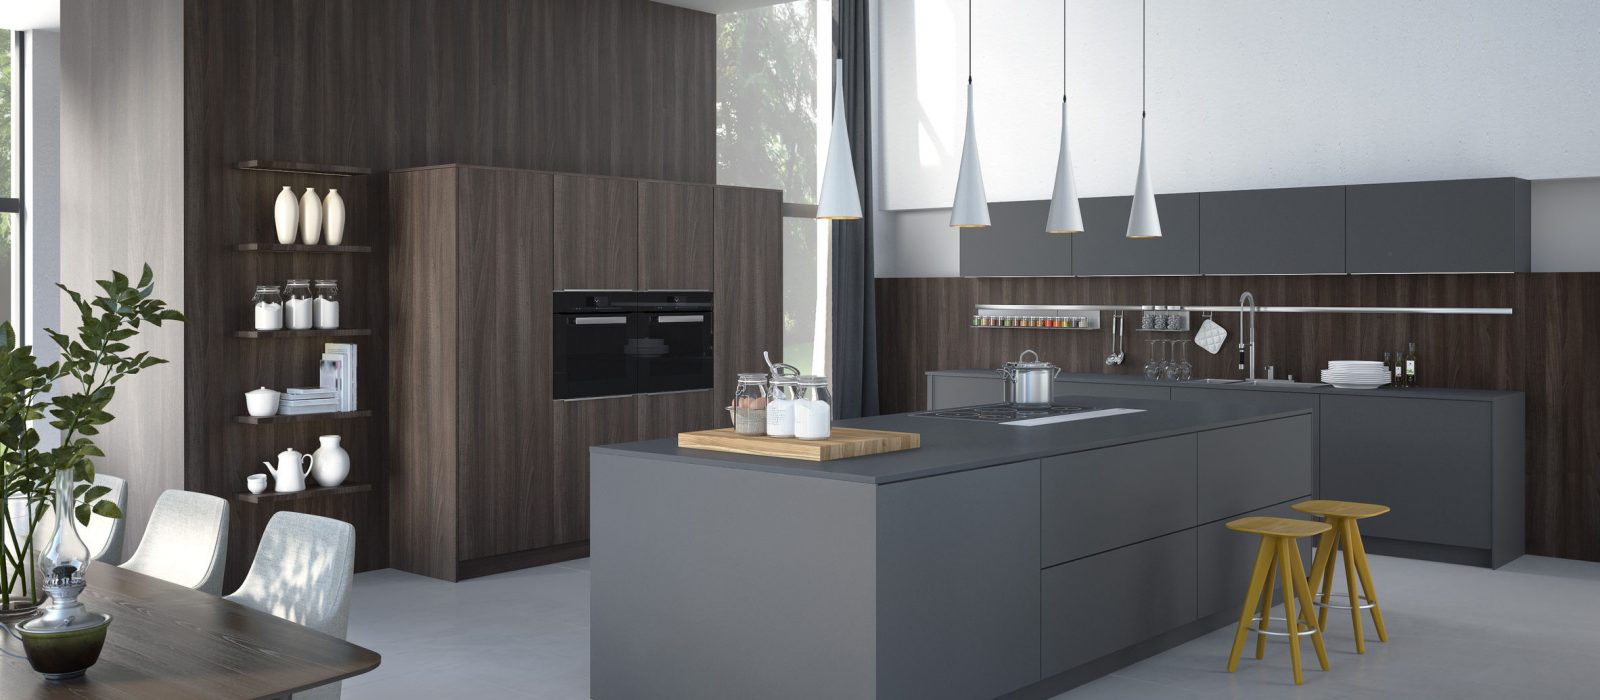 Modern Kitchen Cabinets Las Vegas - Inspire The Cook With A New Kitchen ...